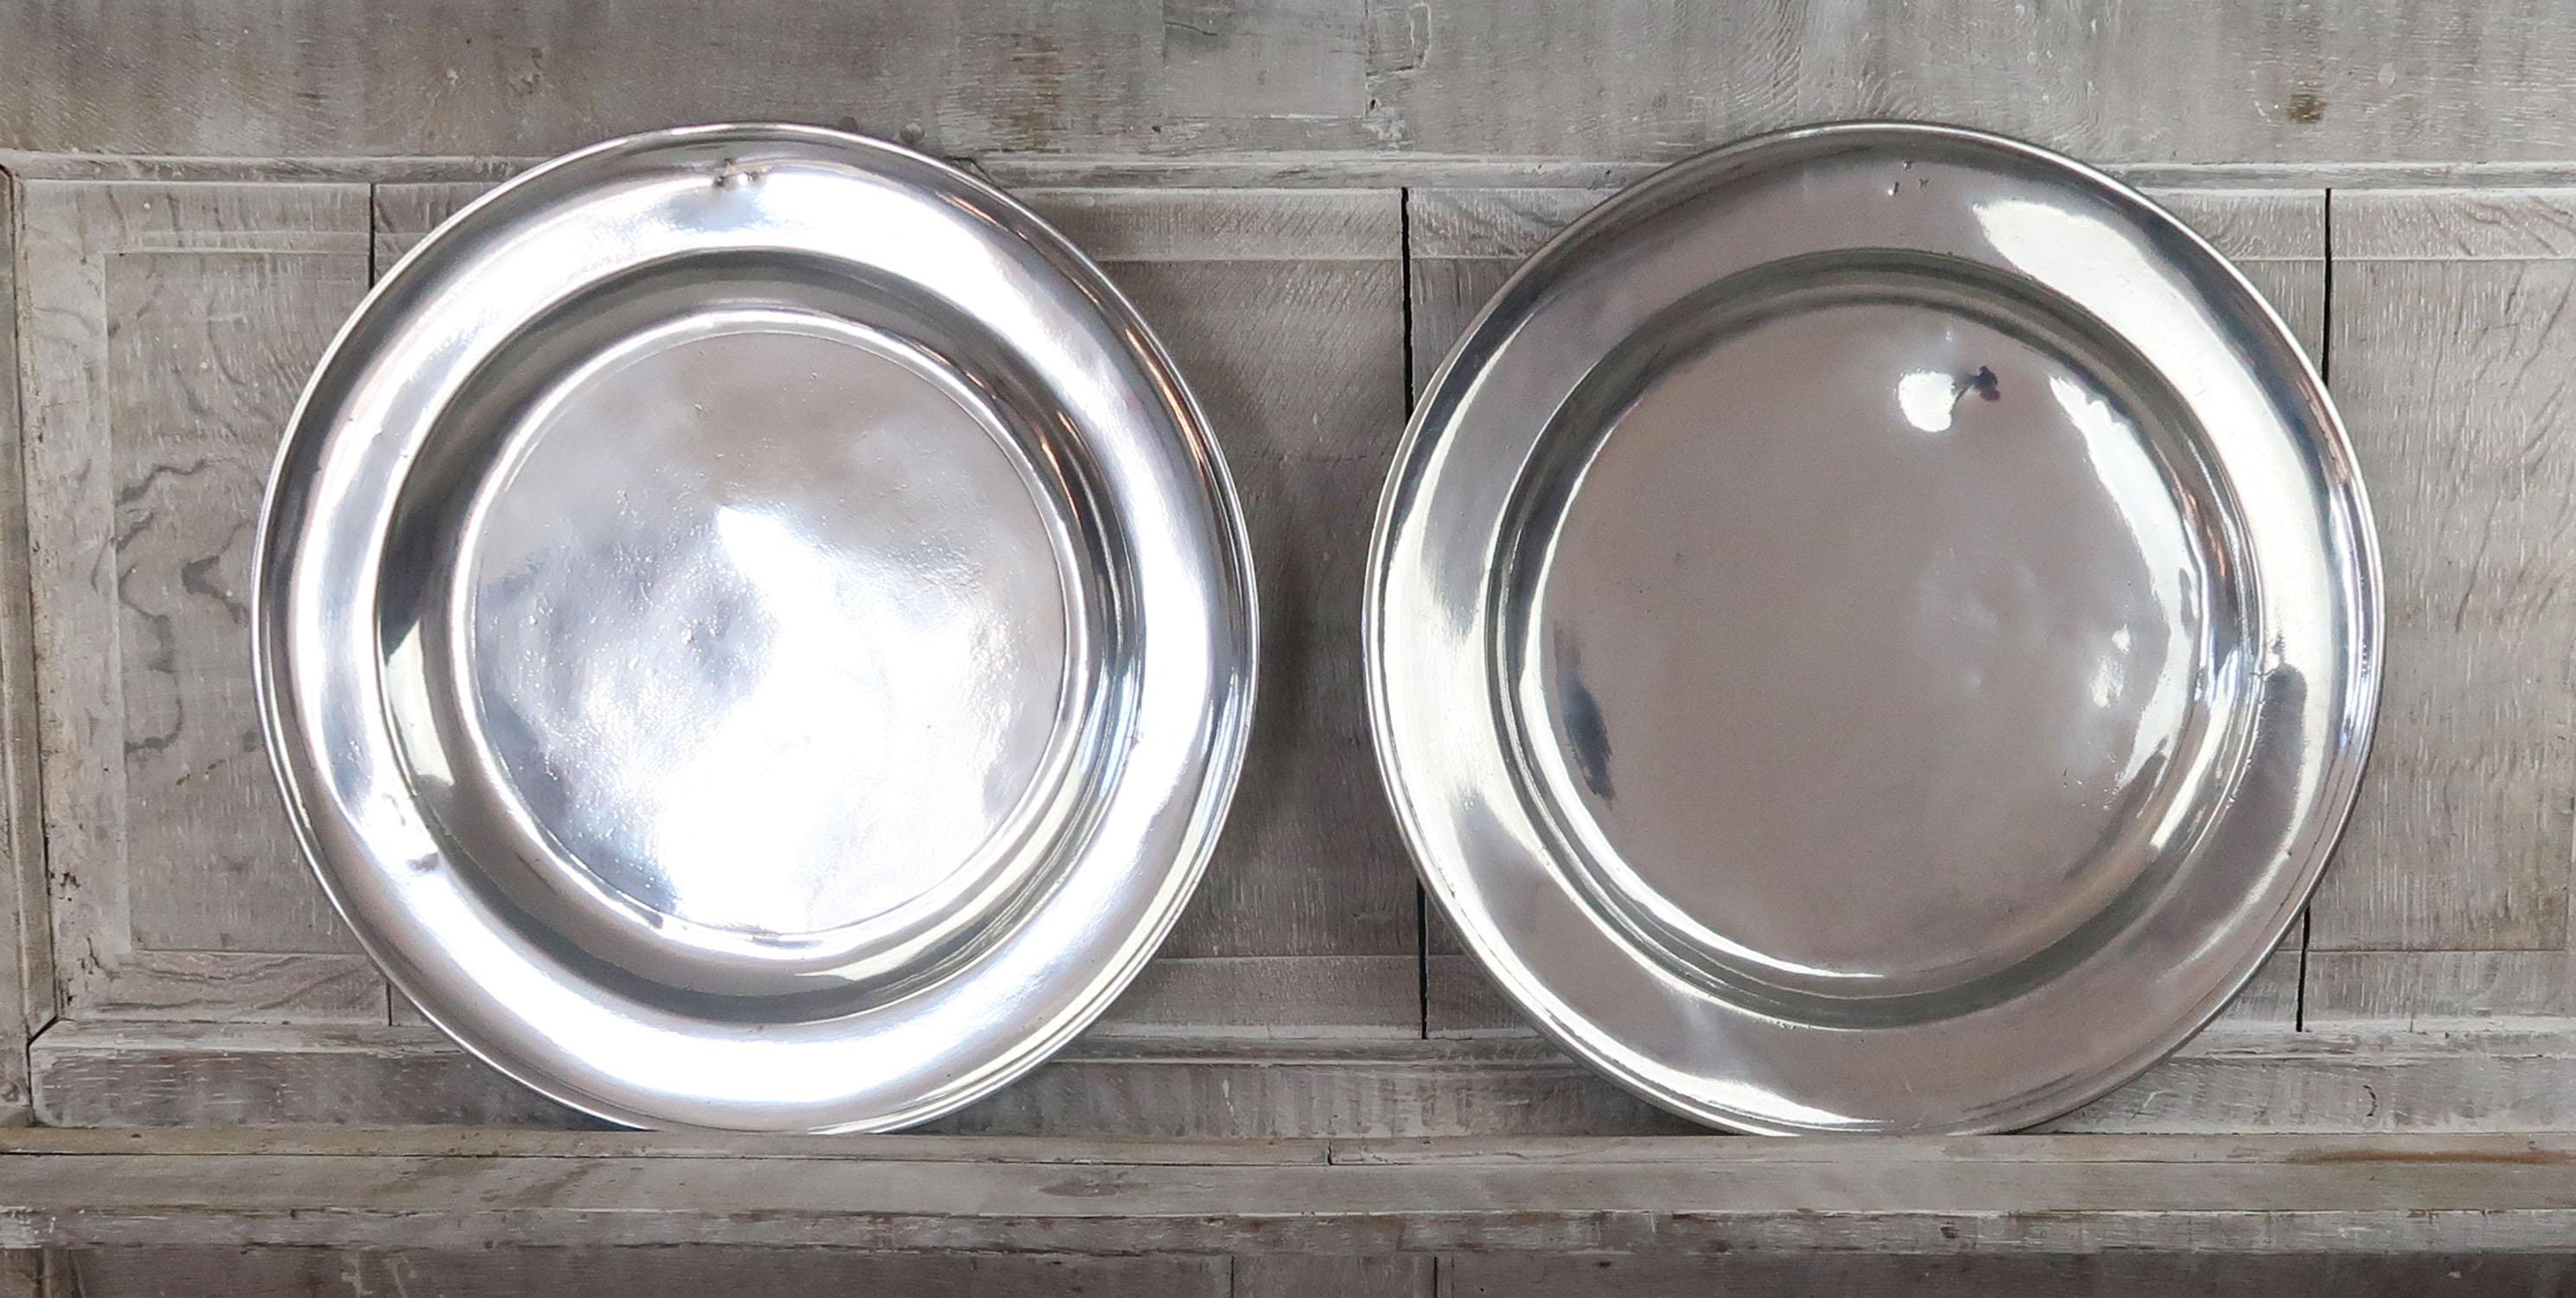 2 great highly polished pewter chargers. Measure: (18 inches).

English, late 18th century

The same ownership inscription on the front rim of both of them.

Rubbed touch marks on the underside. Probably a London maker.

The pewter has been